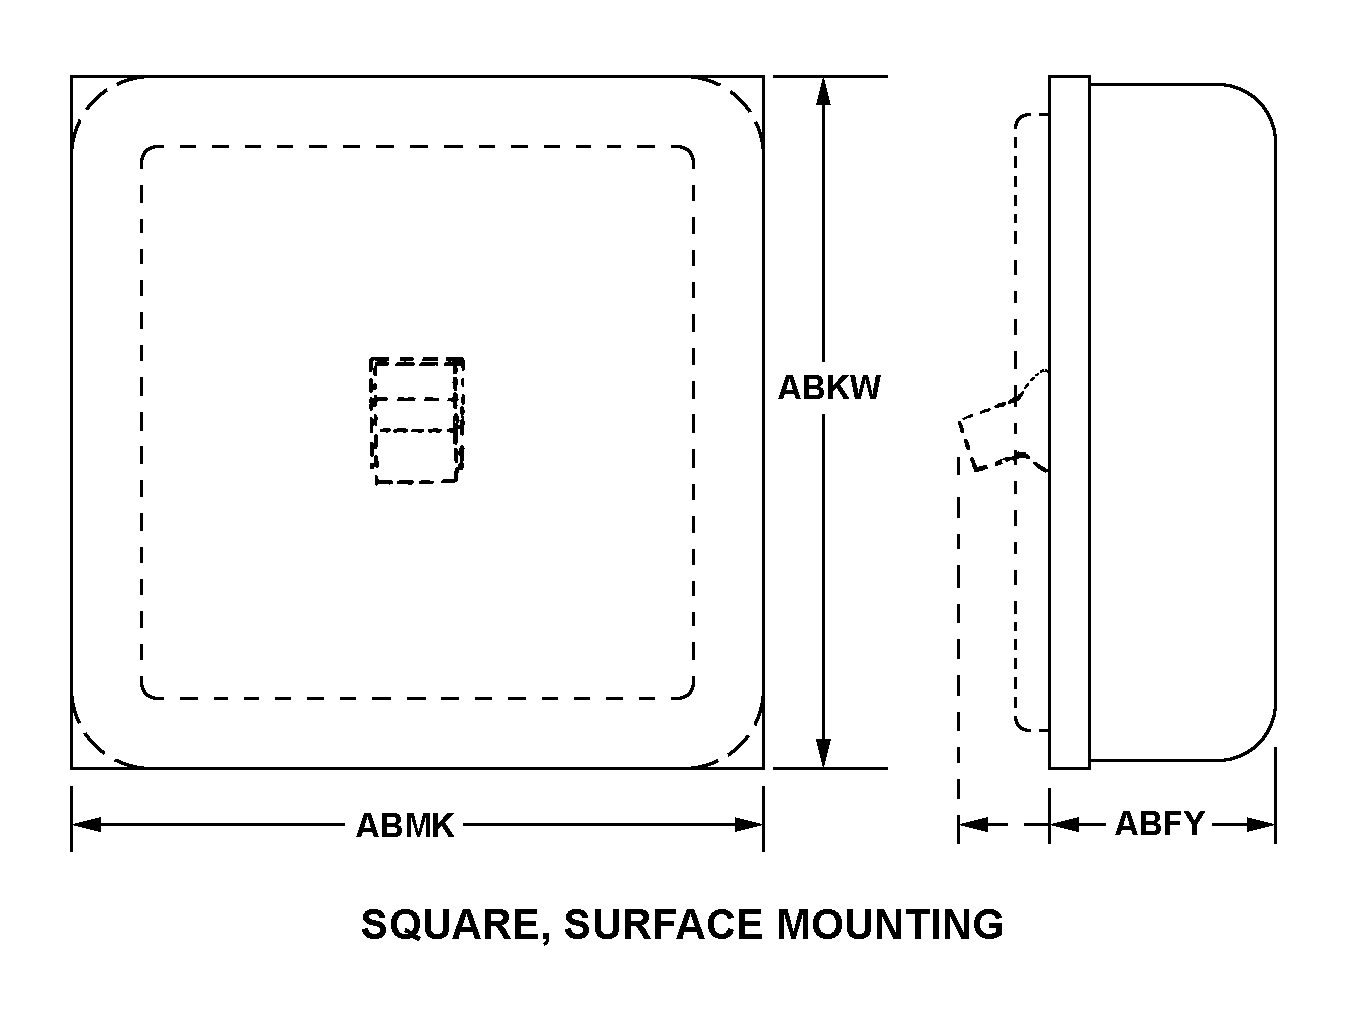 SQUARE, SURFACE MOUNTING style nsn 6110-01-199-6296